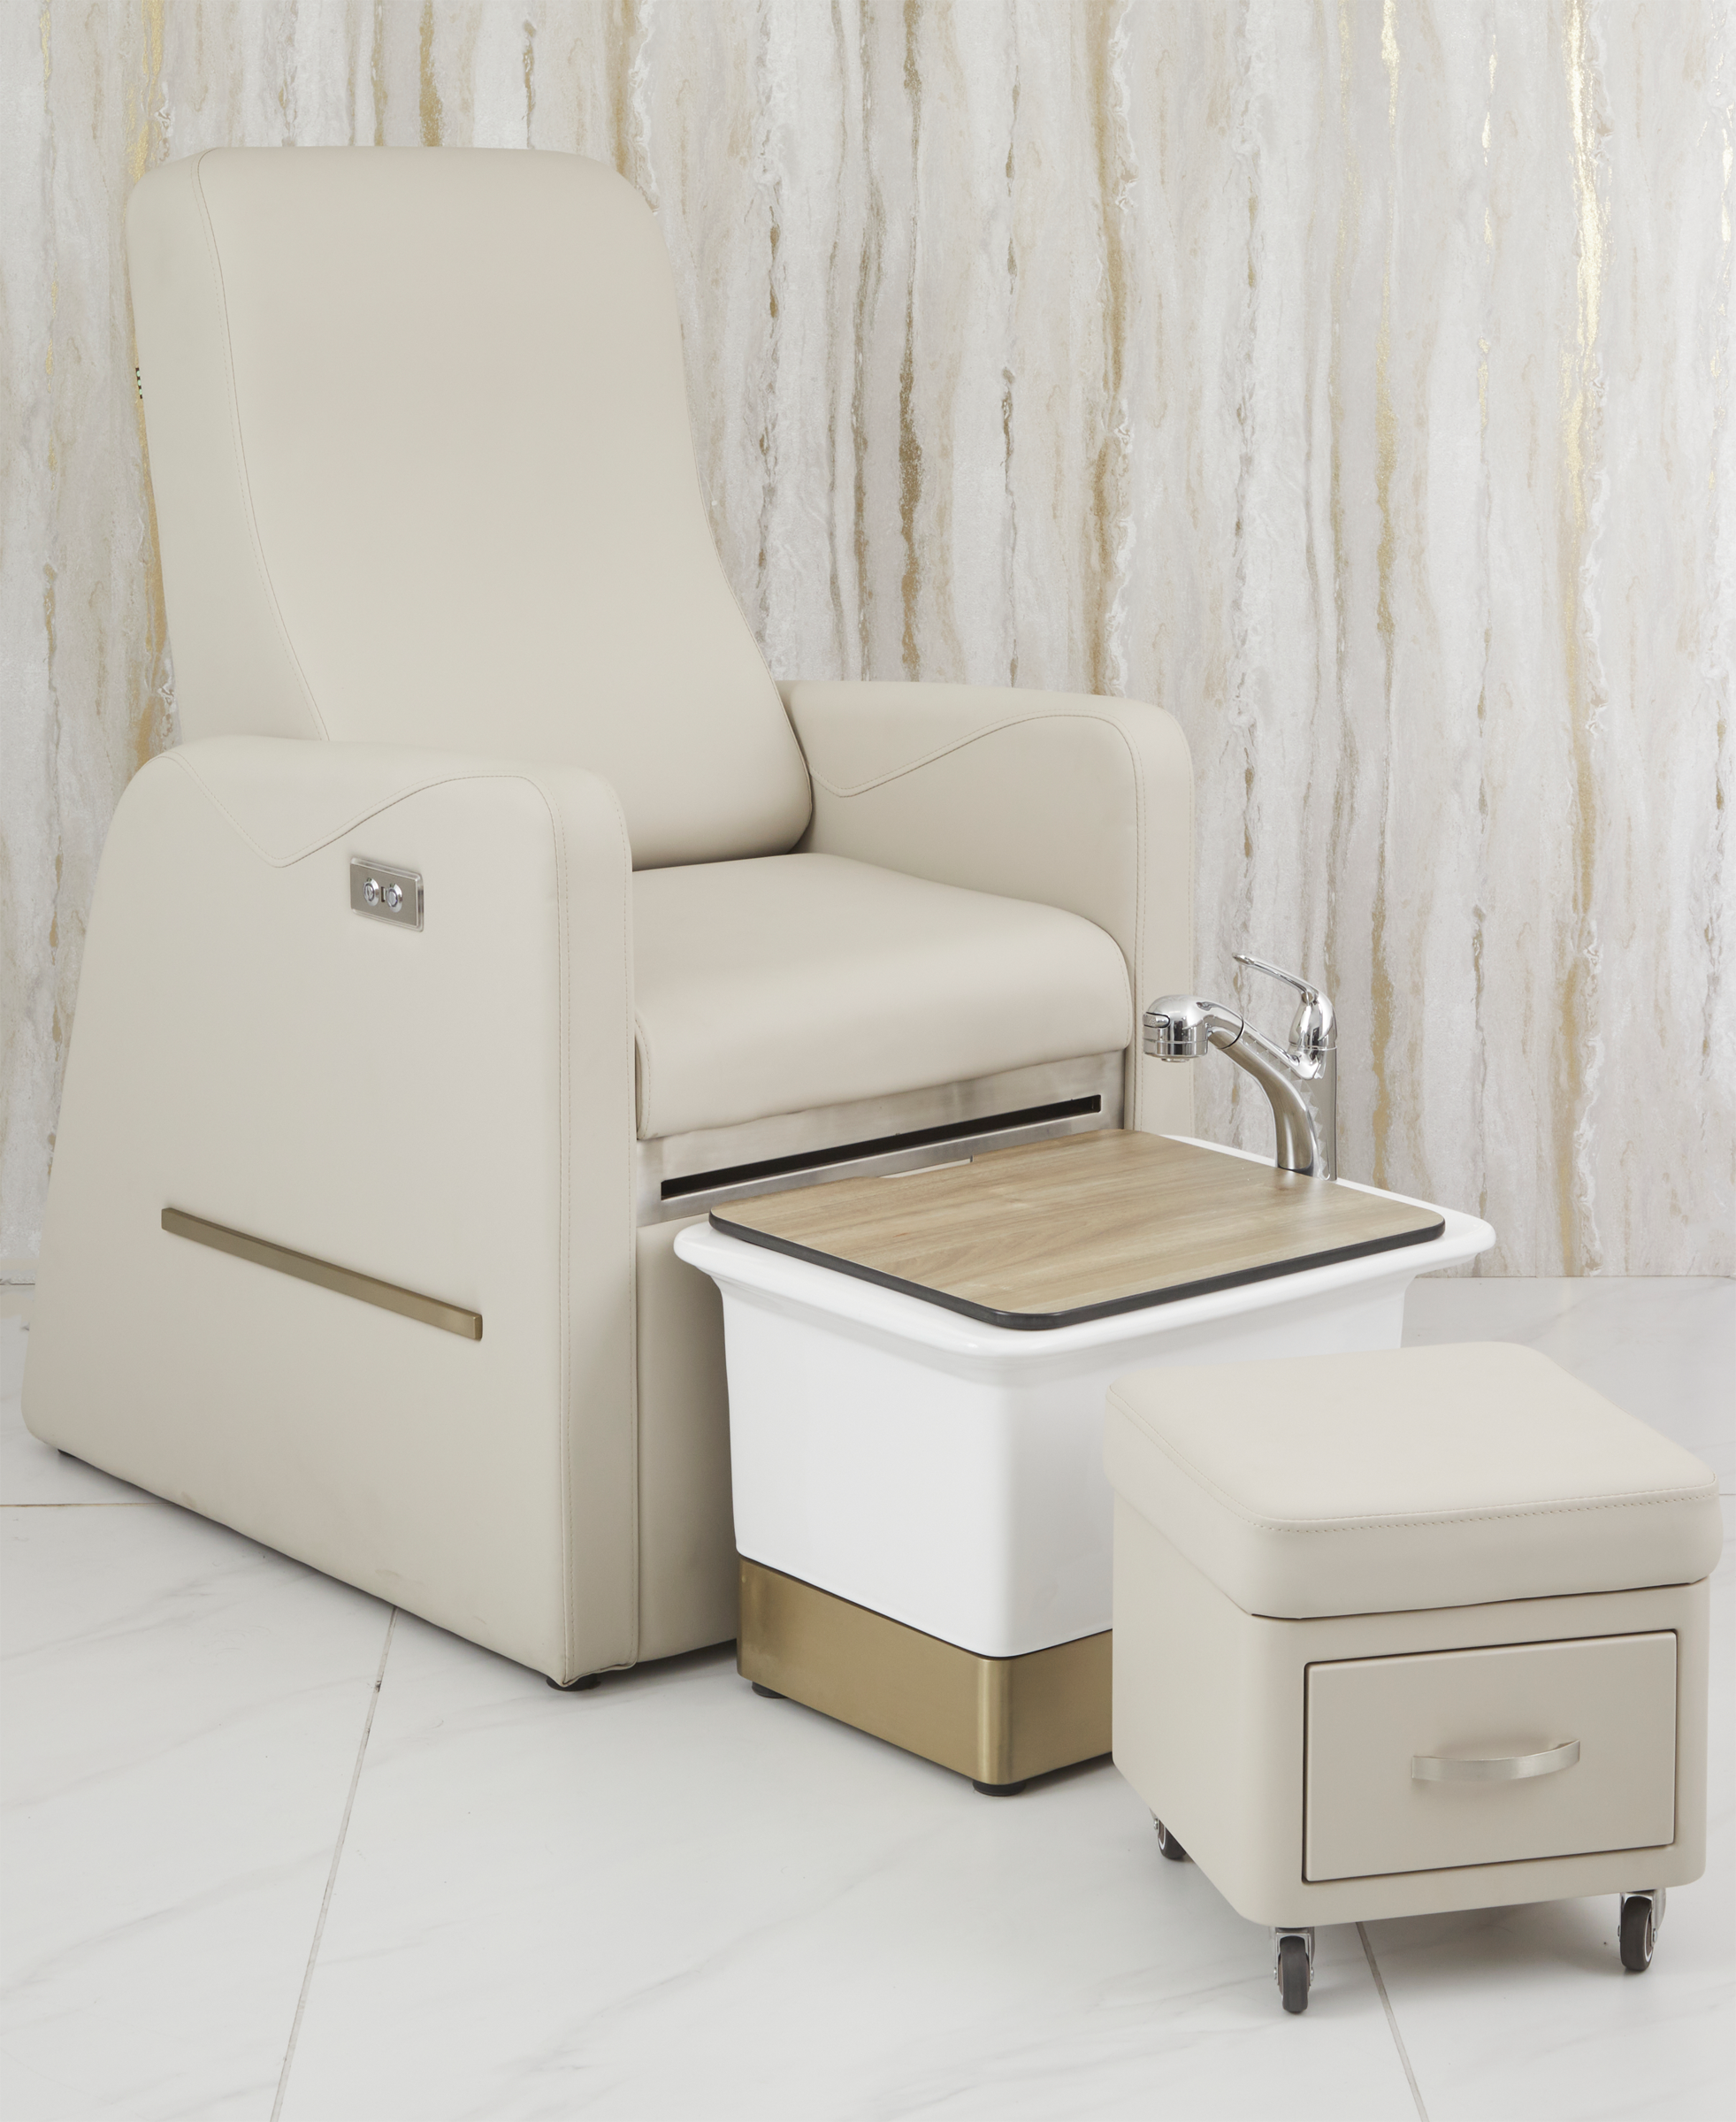 The Cosmic Pedispa - Ivory & Champagne Gold by SEC